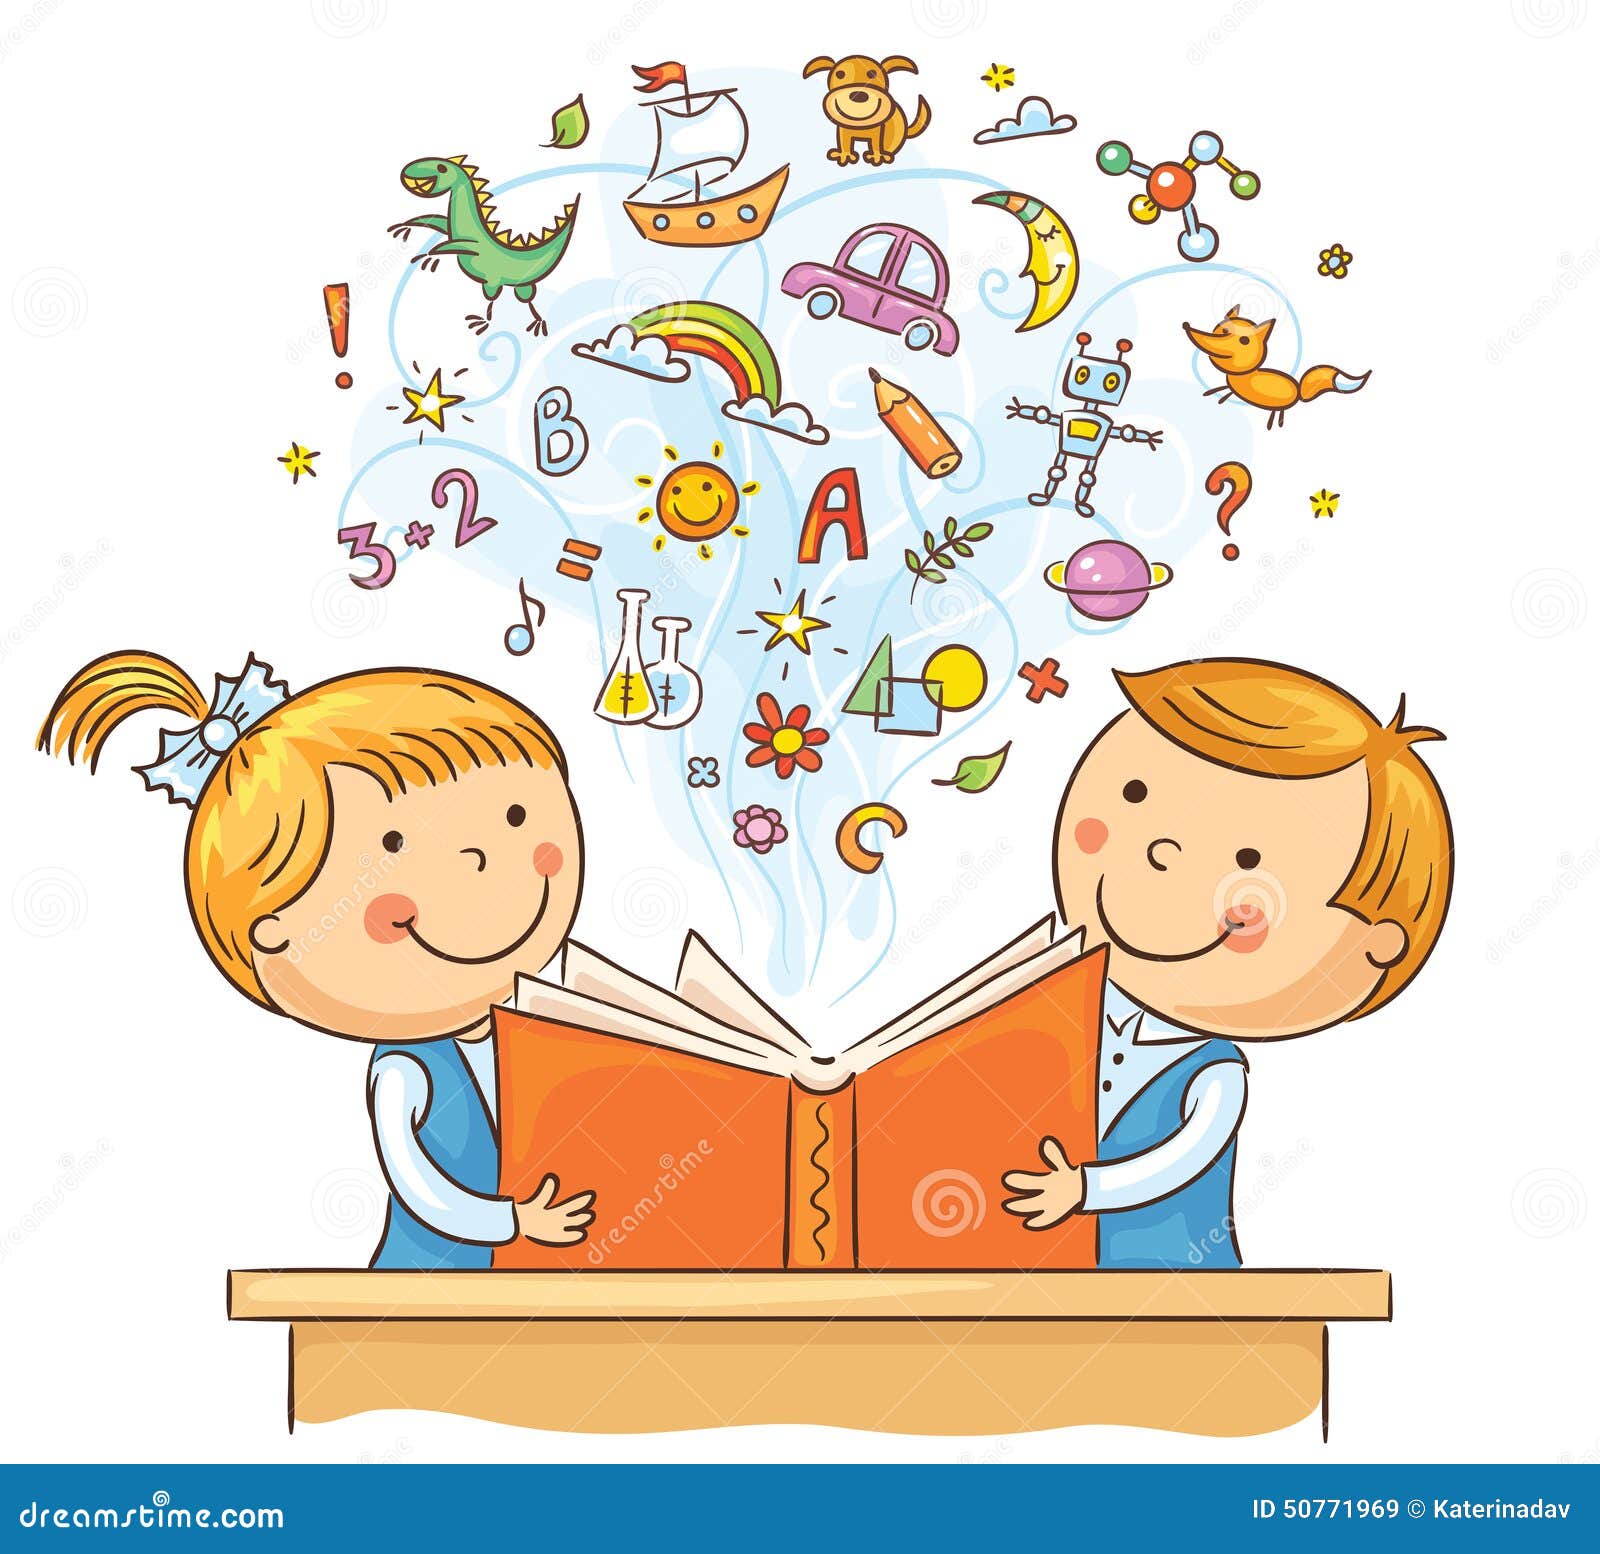 clipart family reading together - photo #23